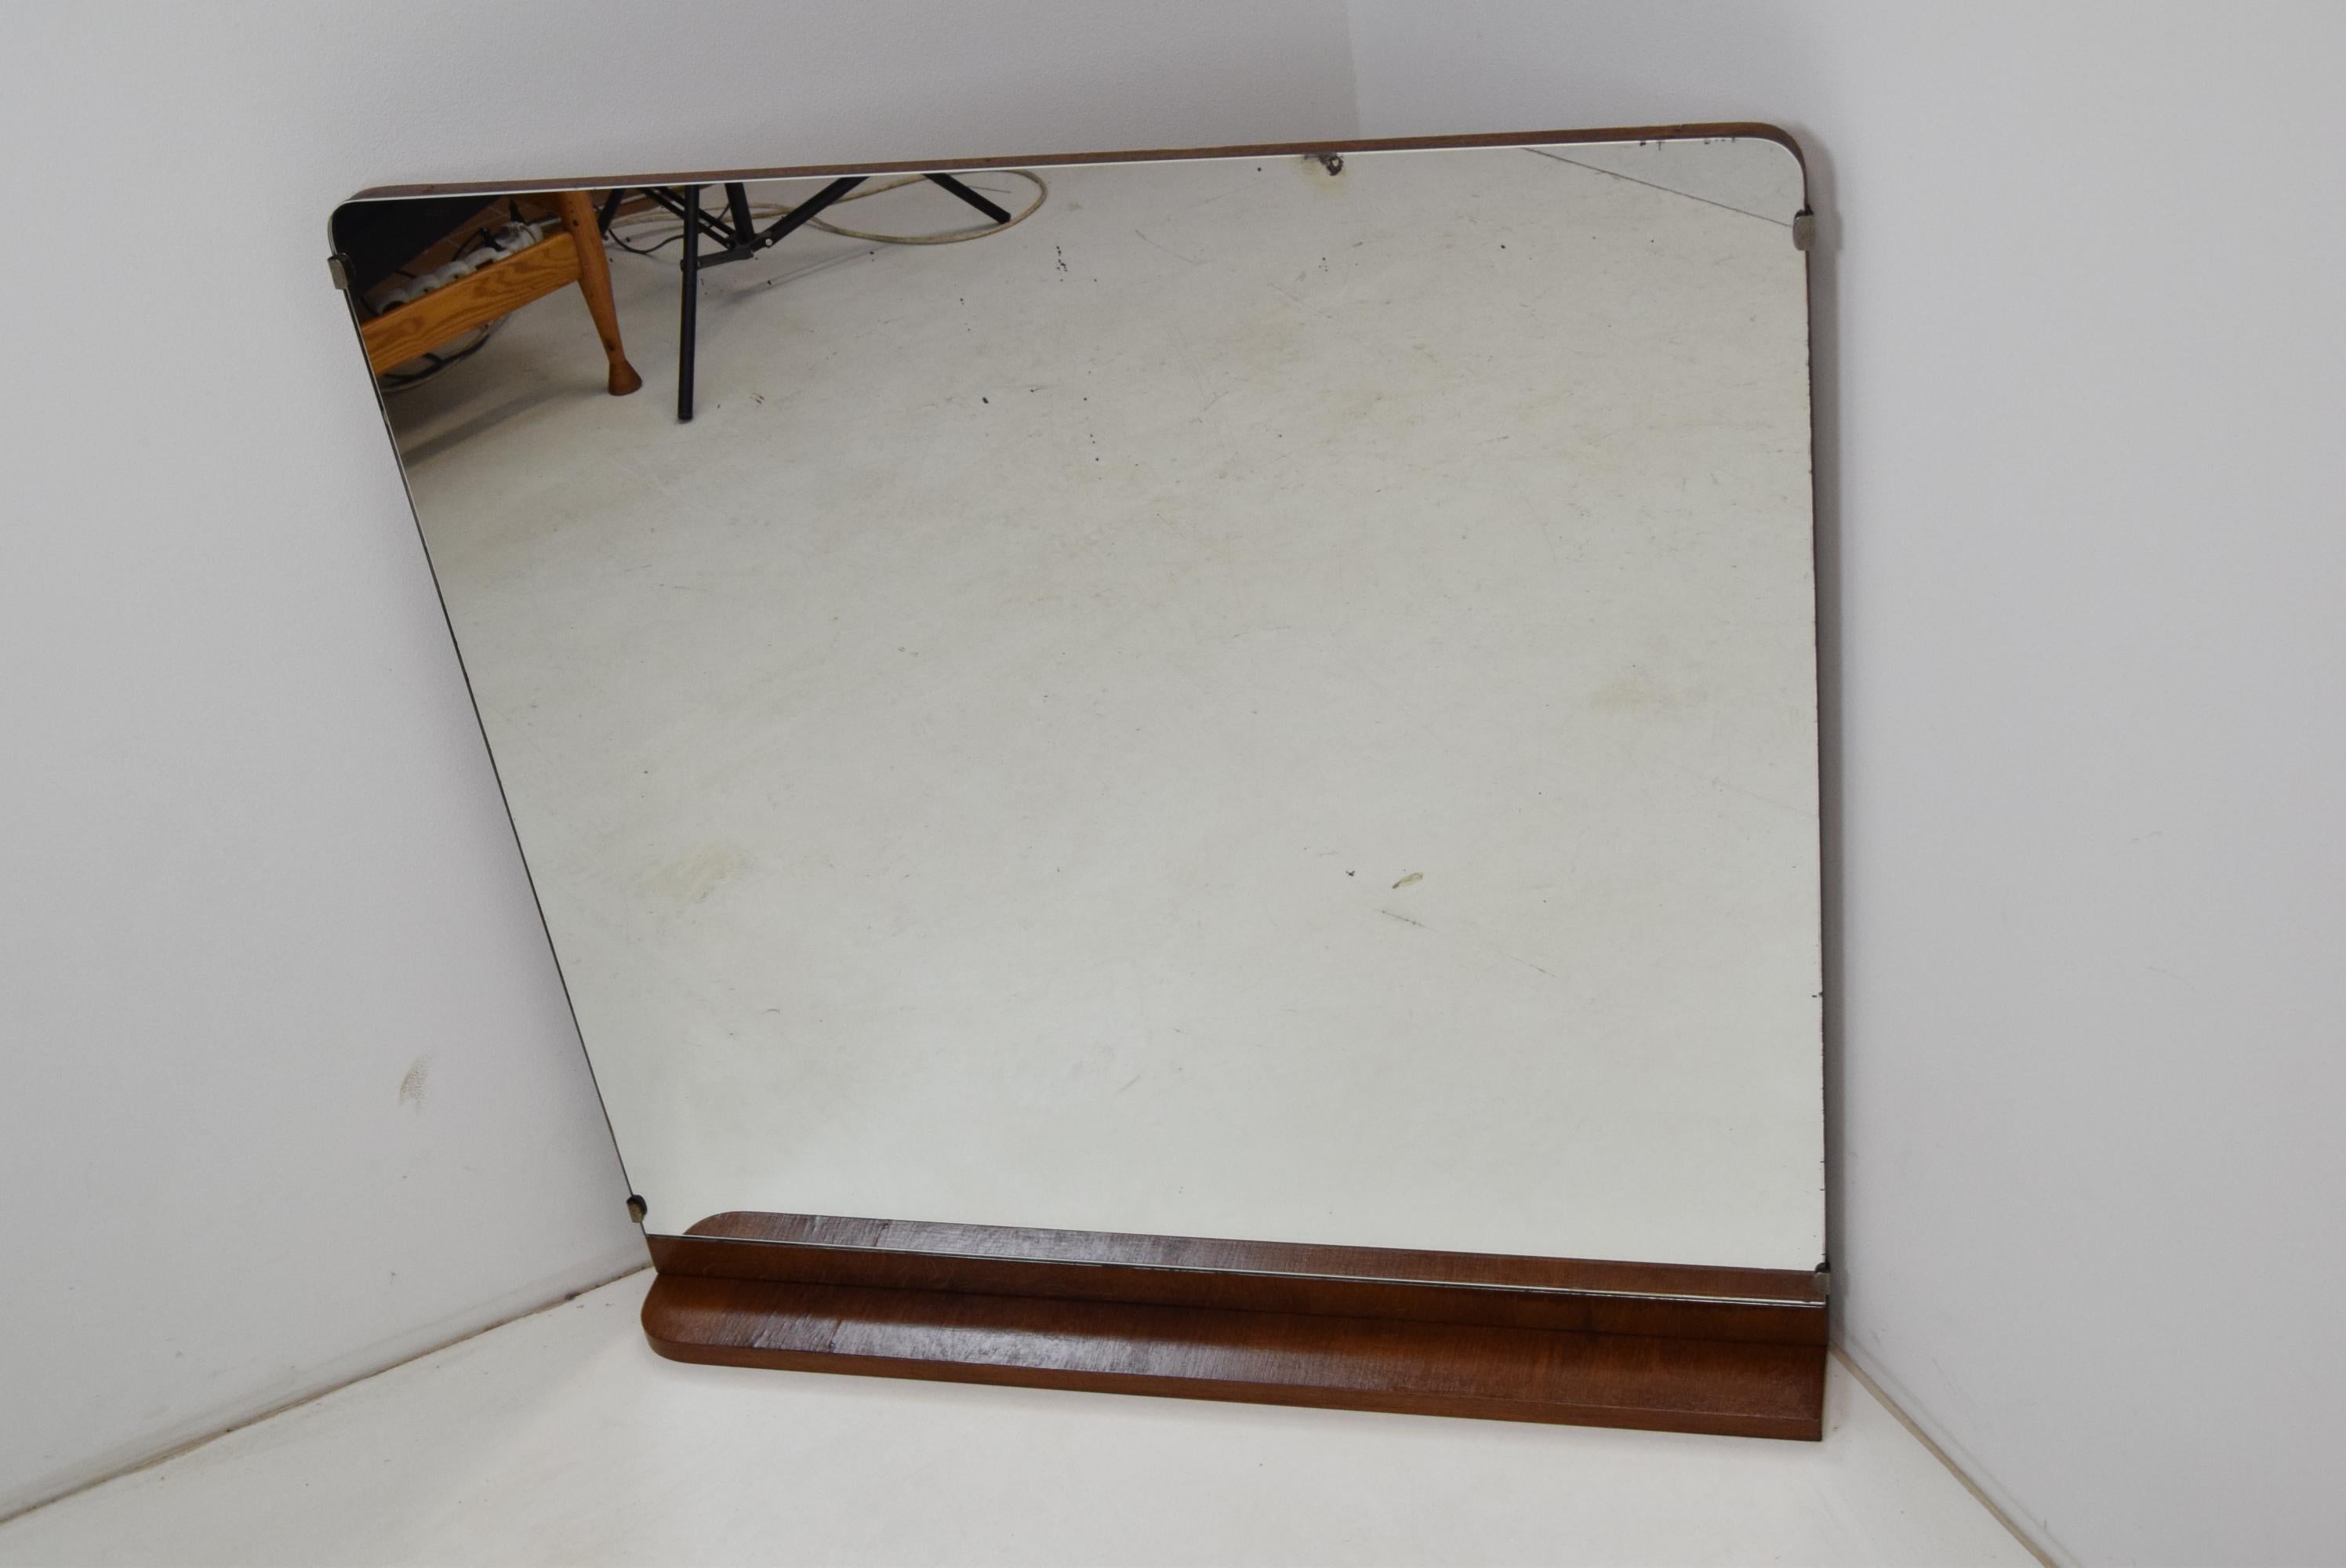 Made in Czechoslovakia
Made of Mirror, Wood
With aged patina
Original condition.
 